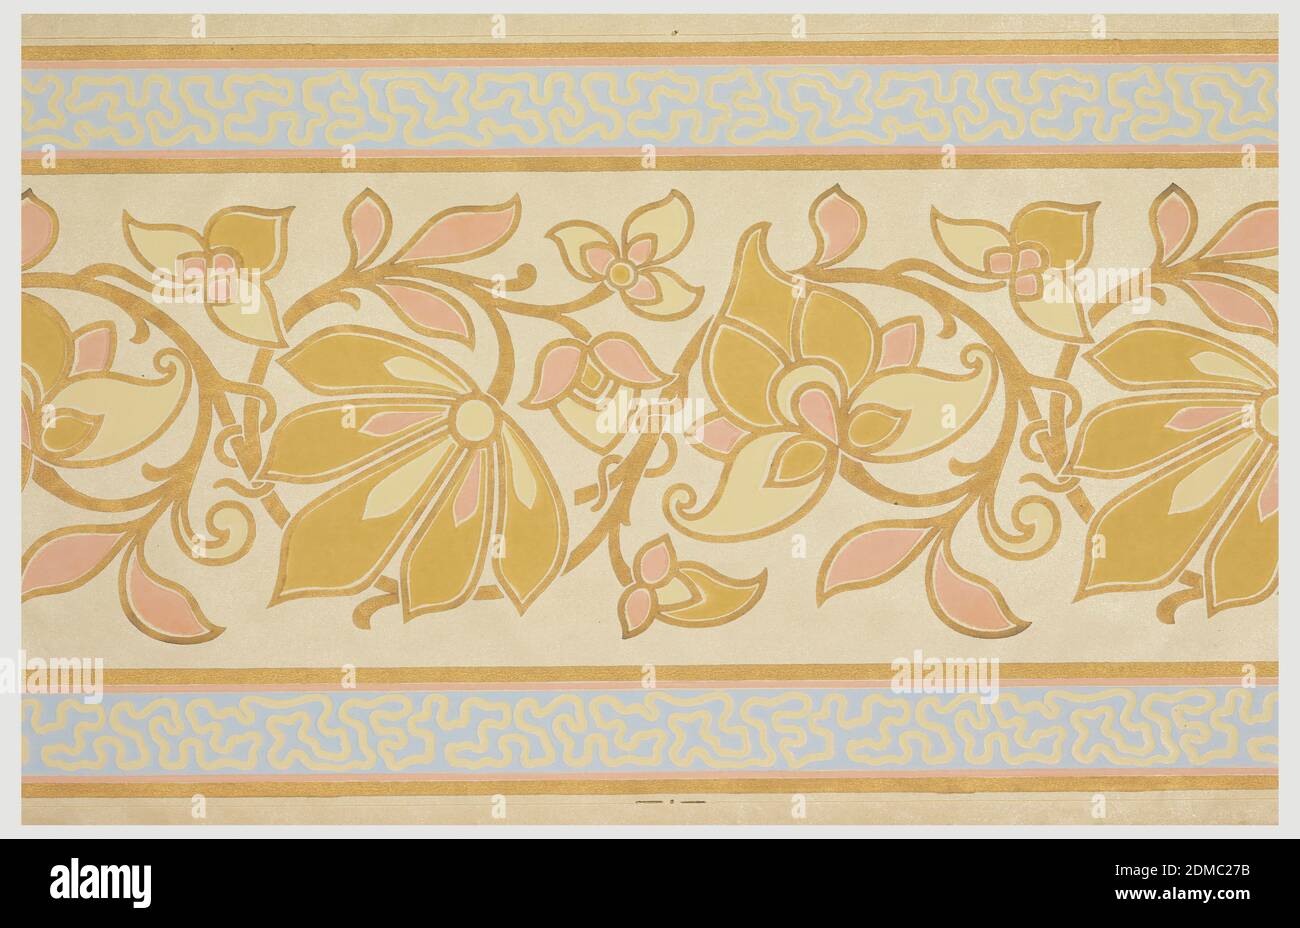 Frieze, Block-printed, Wallpaper roll., Large scrolling foliate motif printed in salmon and ocher against tan mica ground. Wide light blue band with 'worm-hole' motif along either edge., USA, 1875–1906, Wallcoverings, Frieze Stock Photo